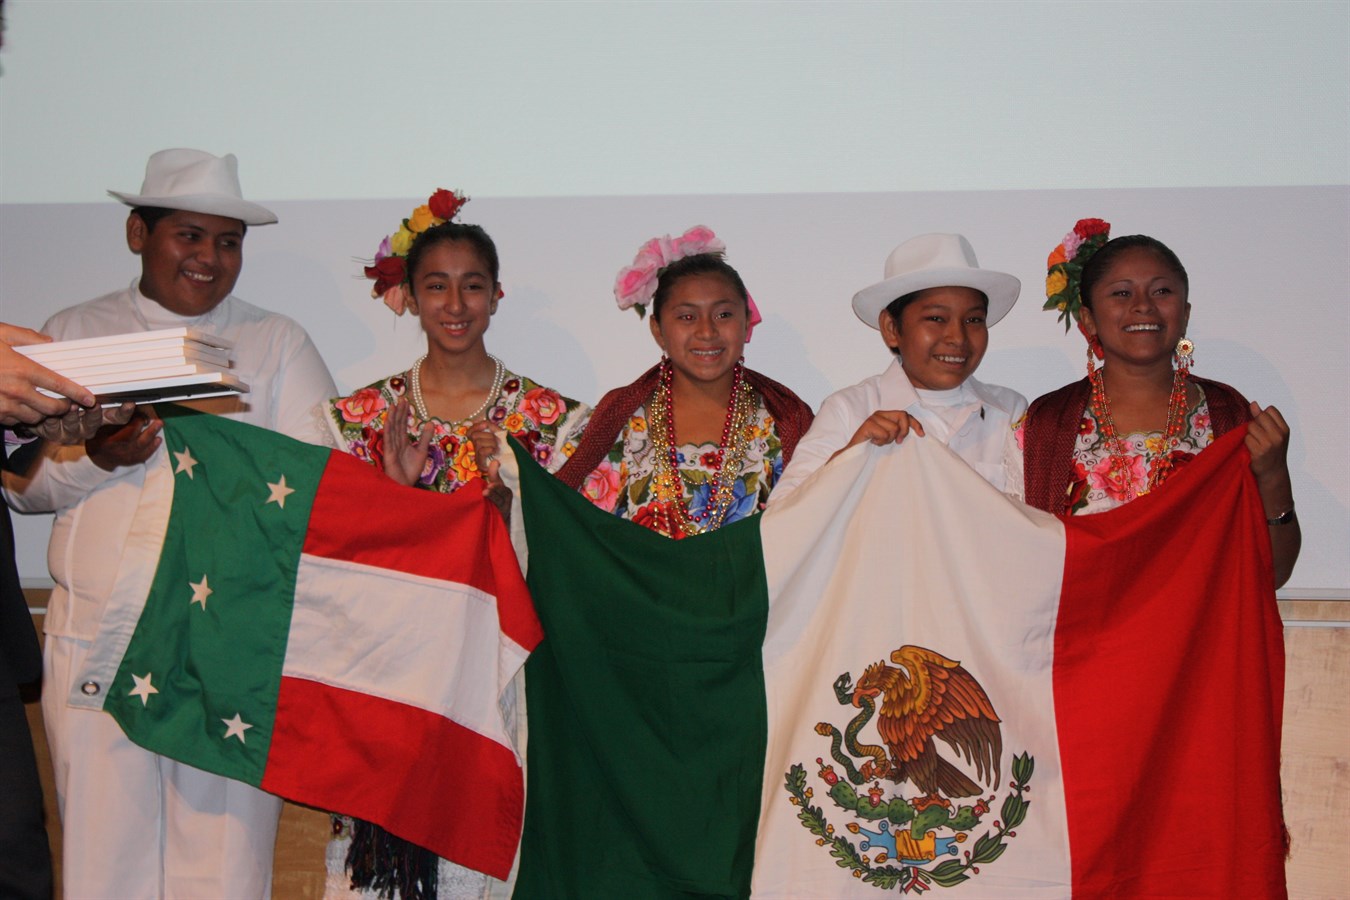 Winning team from Mexico no 2